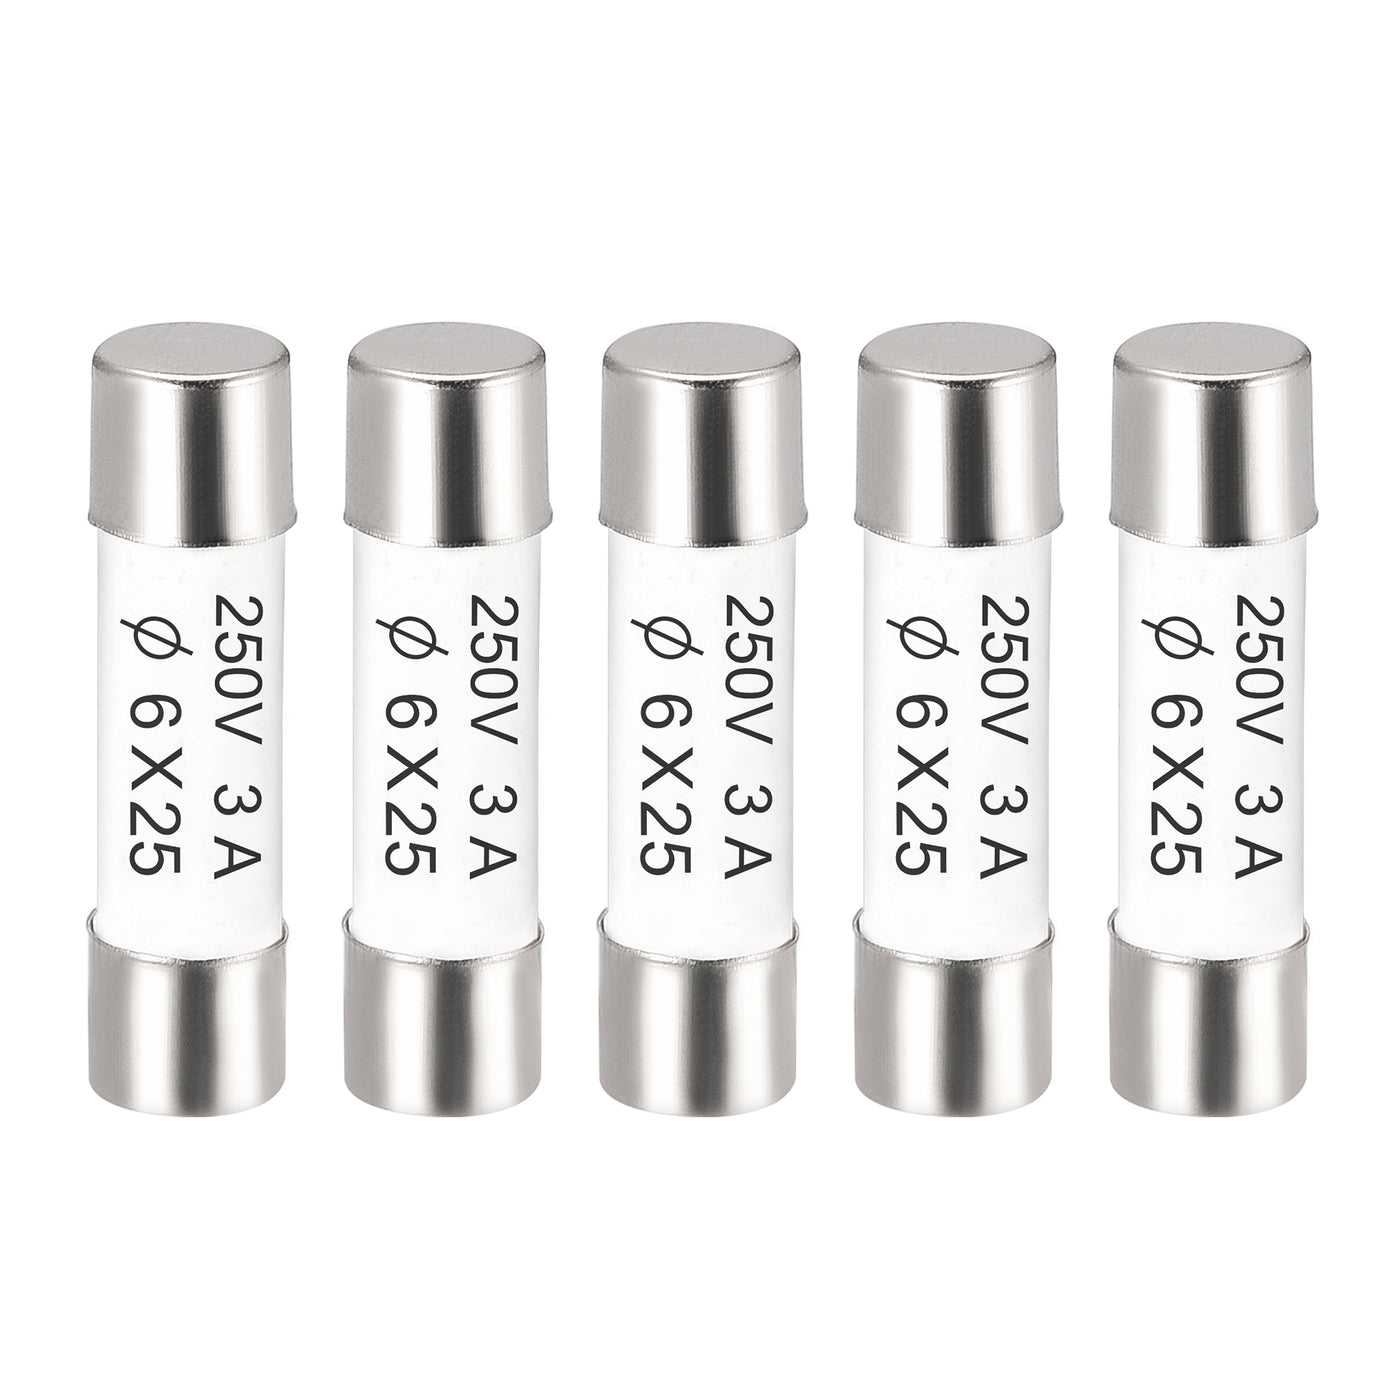 uxcell Uxcell Ceramic Cartridge Fuses 3A 250V 6x25mm Fast Blow for Energy Saving Lamp 5pcs